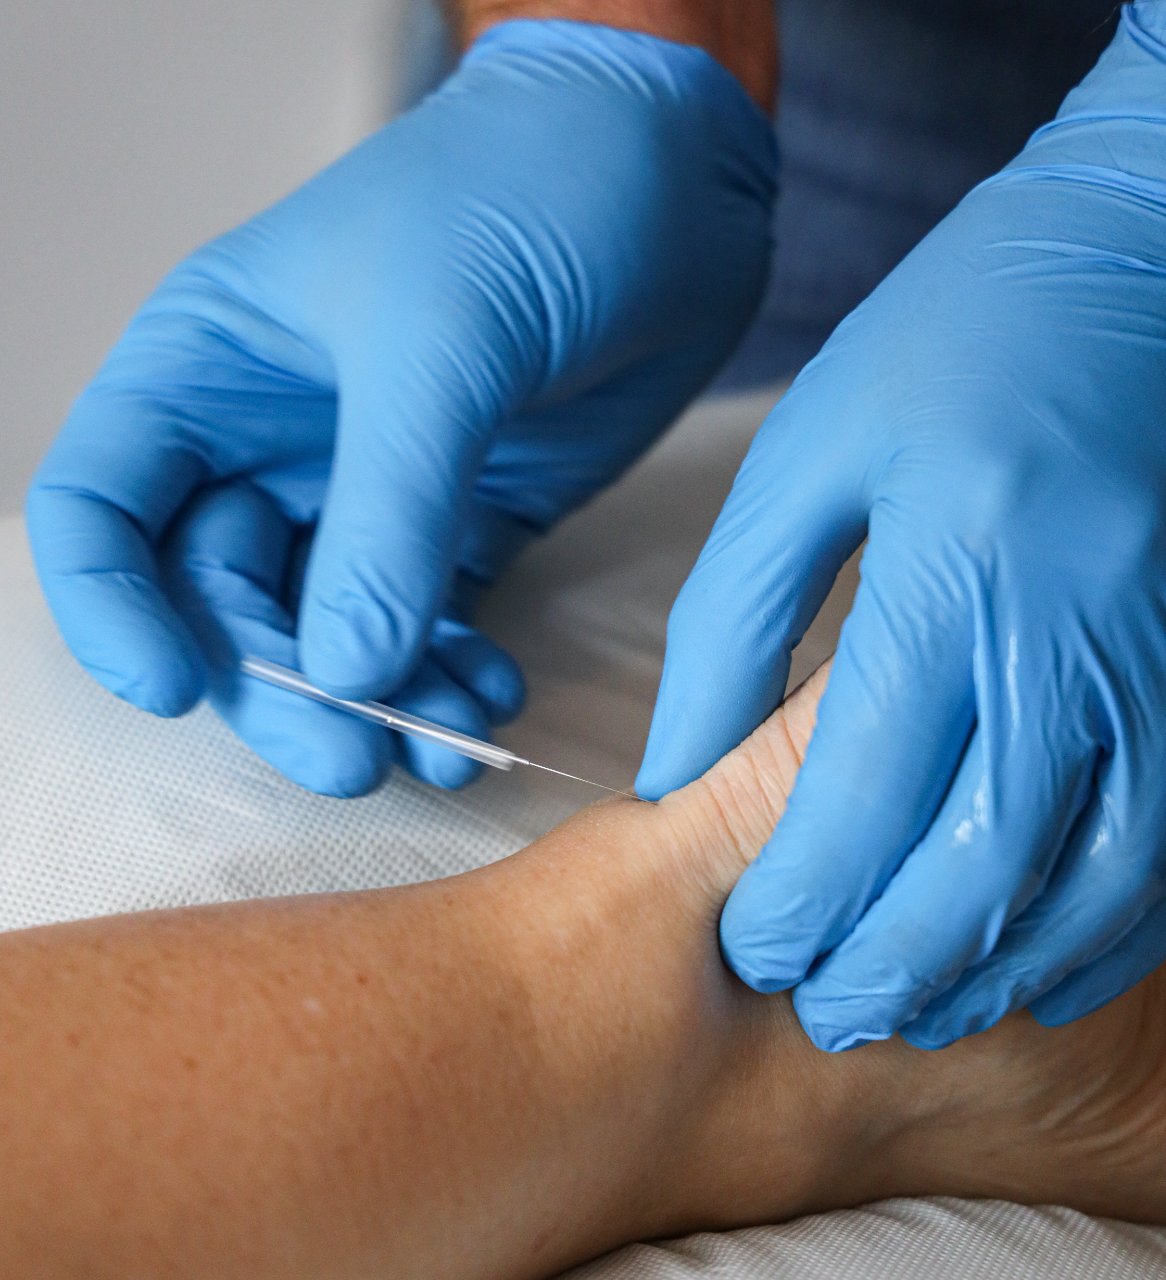 5 Reasons to Try Dry Needling Therapy for Pain Relief